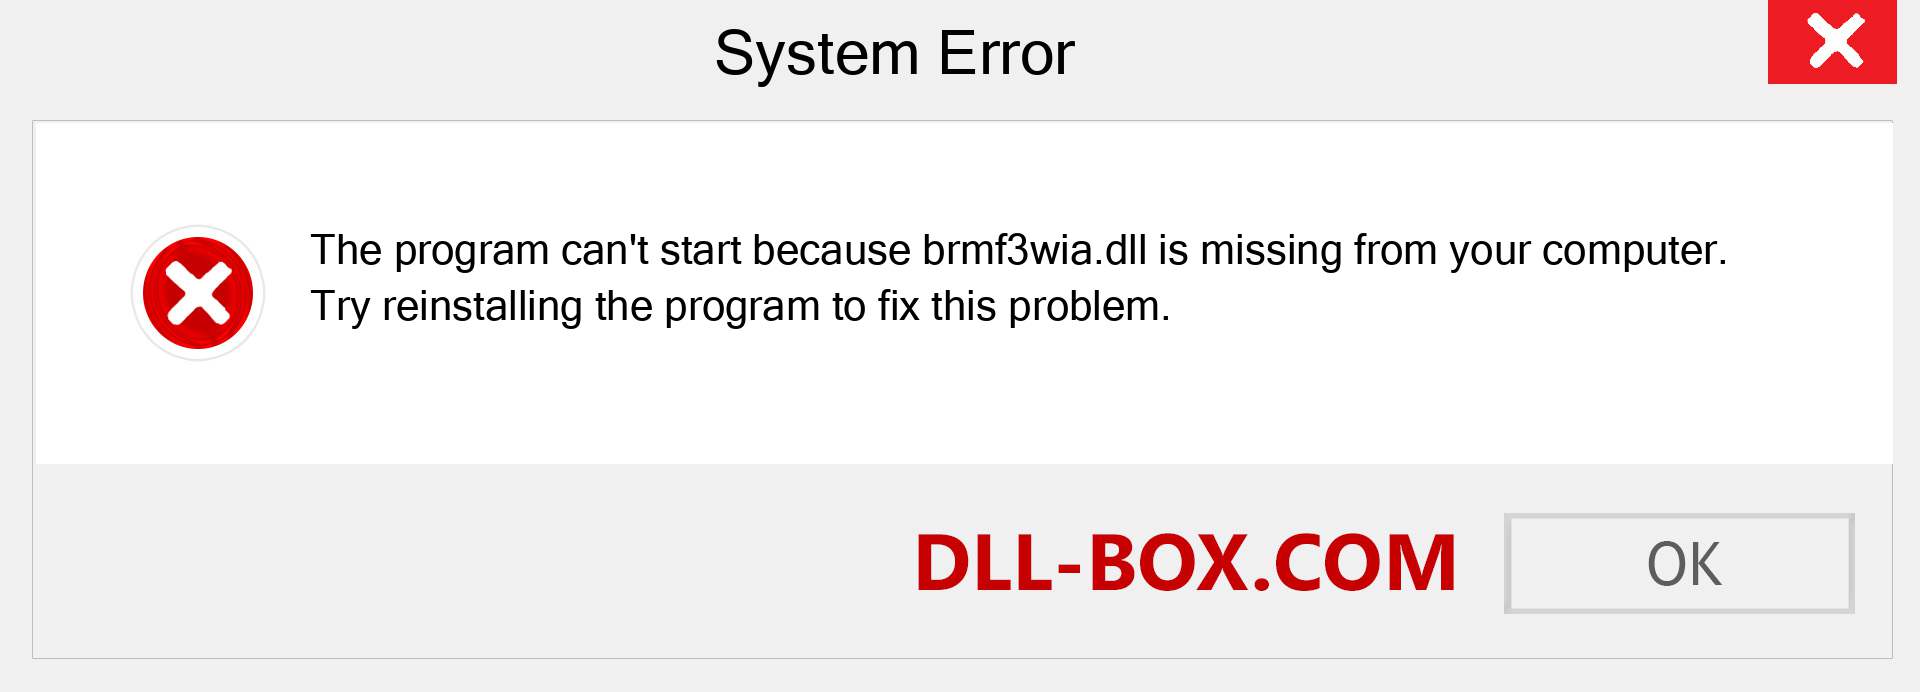  brmf3wia.dll file is missing?. Download for Windows 7, 8, 10 - Fix  brmf3wia dll Missing Error on Windows, photos, images